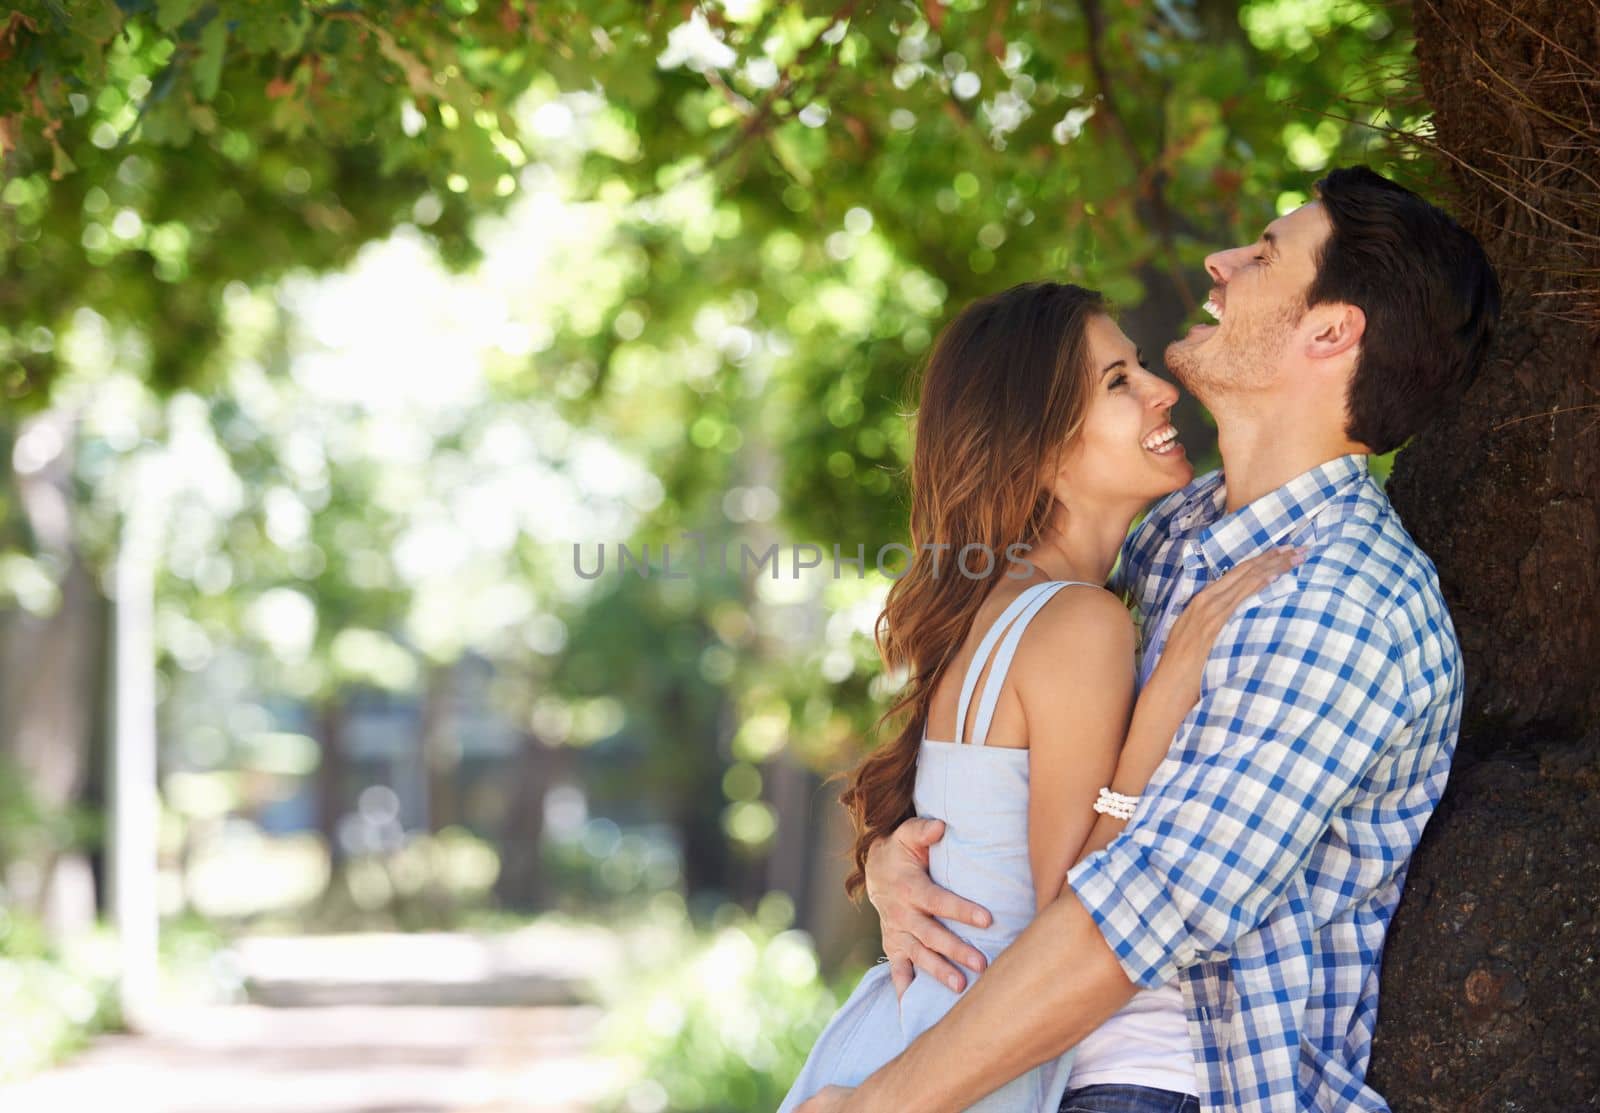 More than just a summer romance. A loving young couple standing in the summer sun